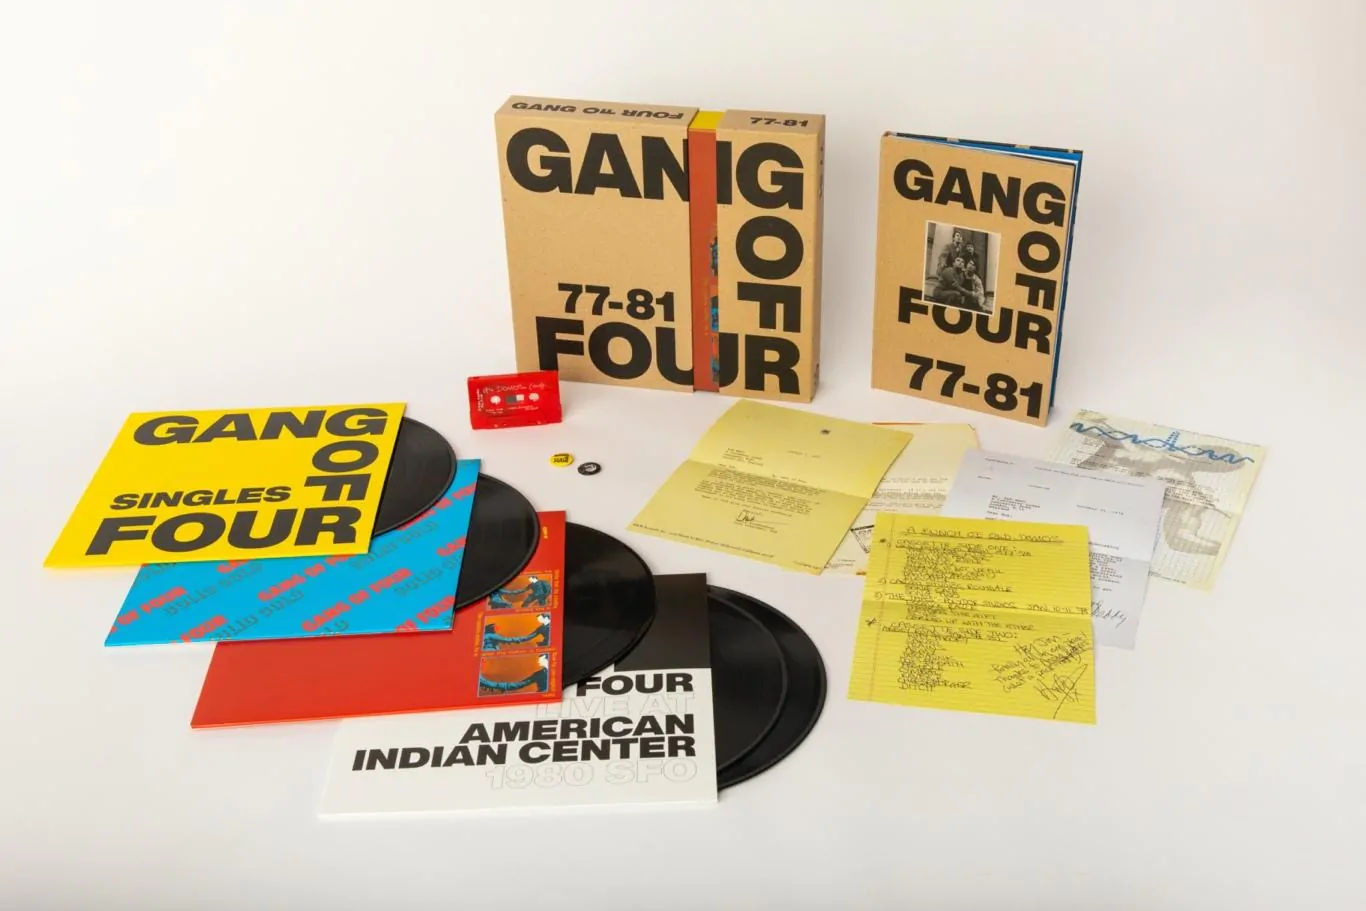 GANG OF FOUR announce 77-81 box set – out March 12th